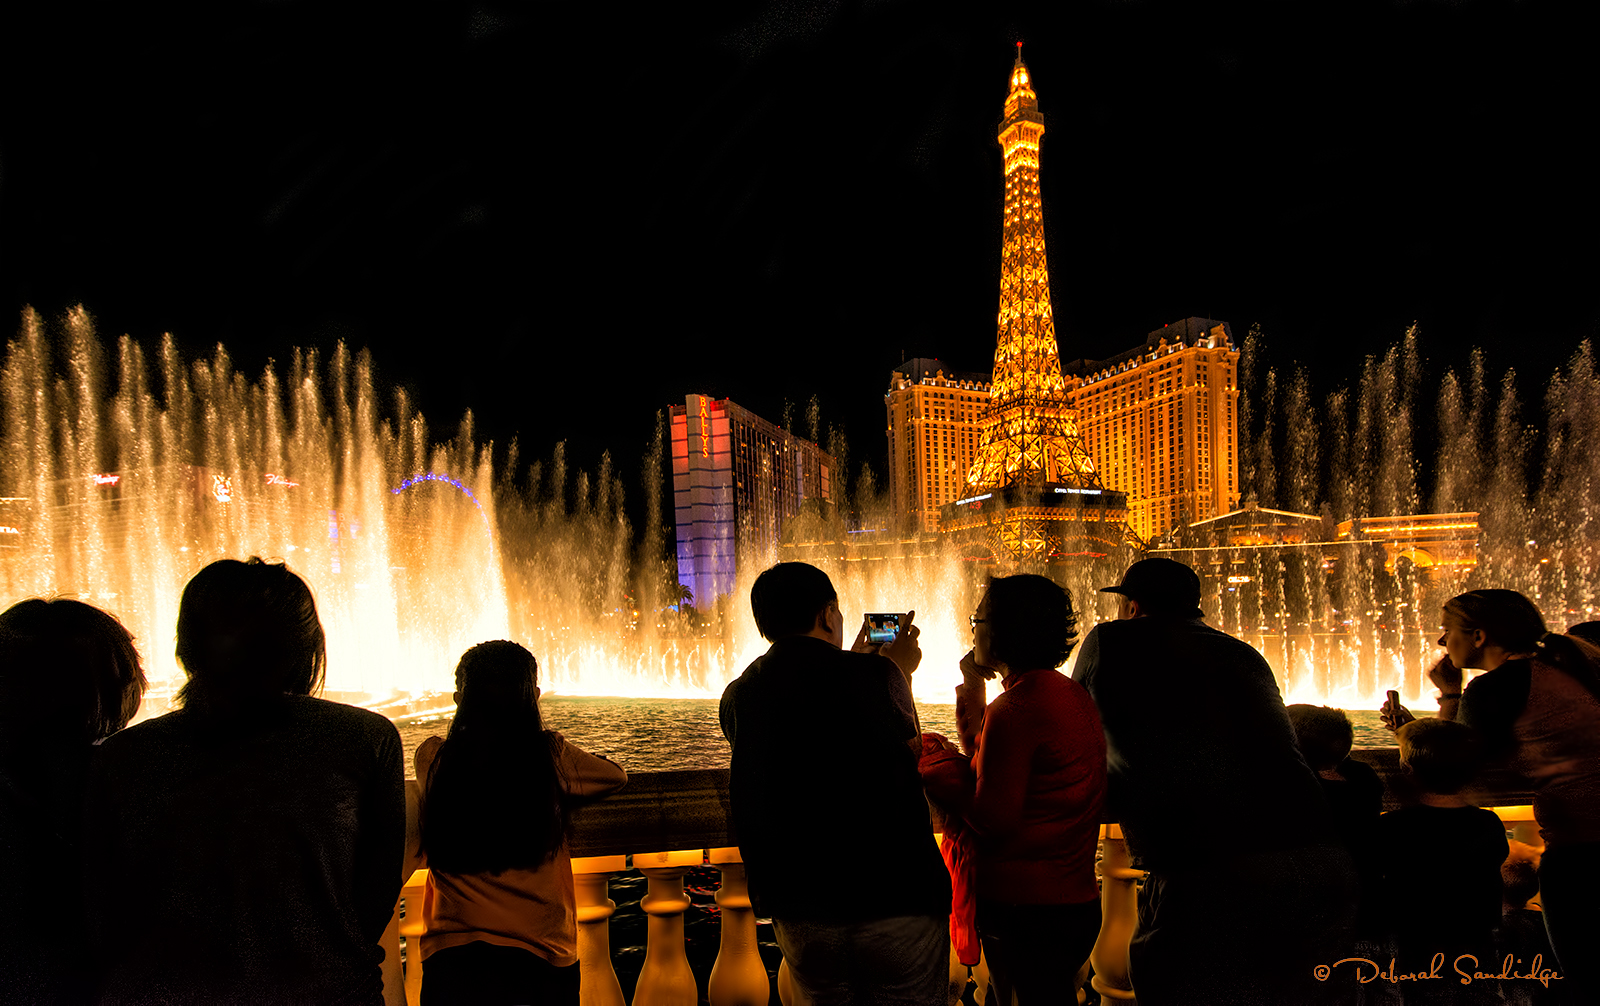 Tourists at the Bellagio fountain at night.